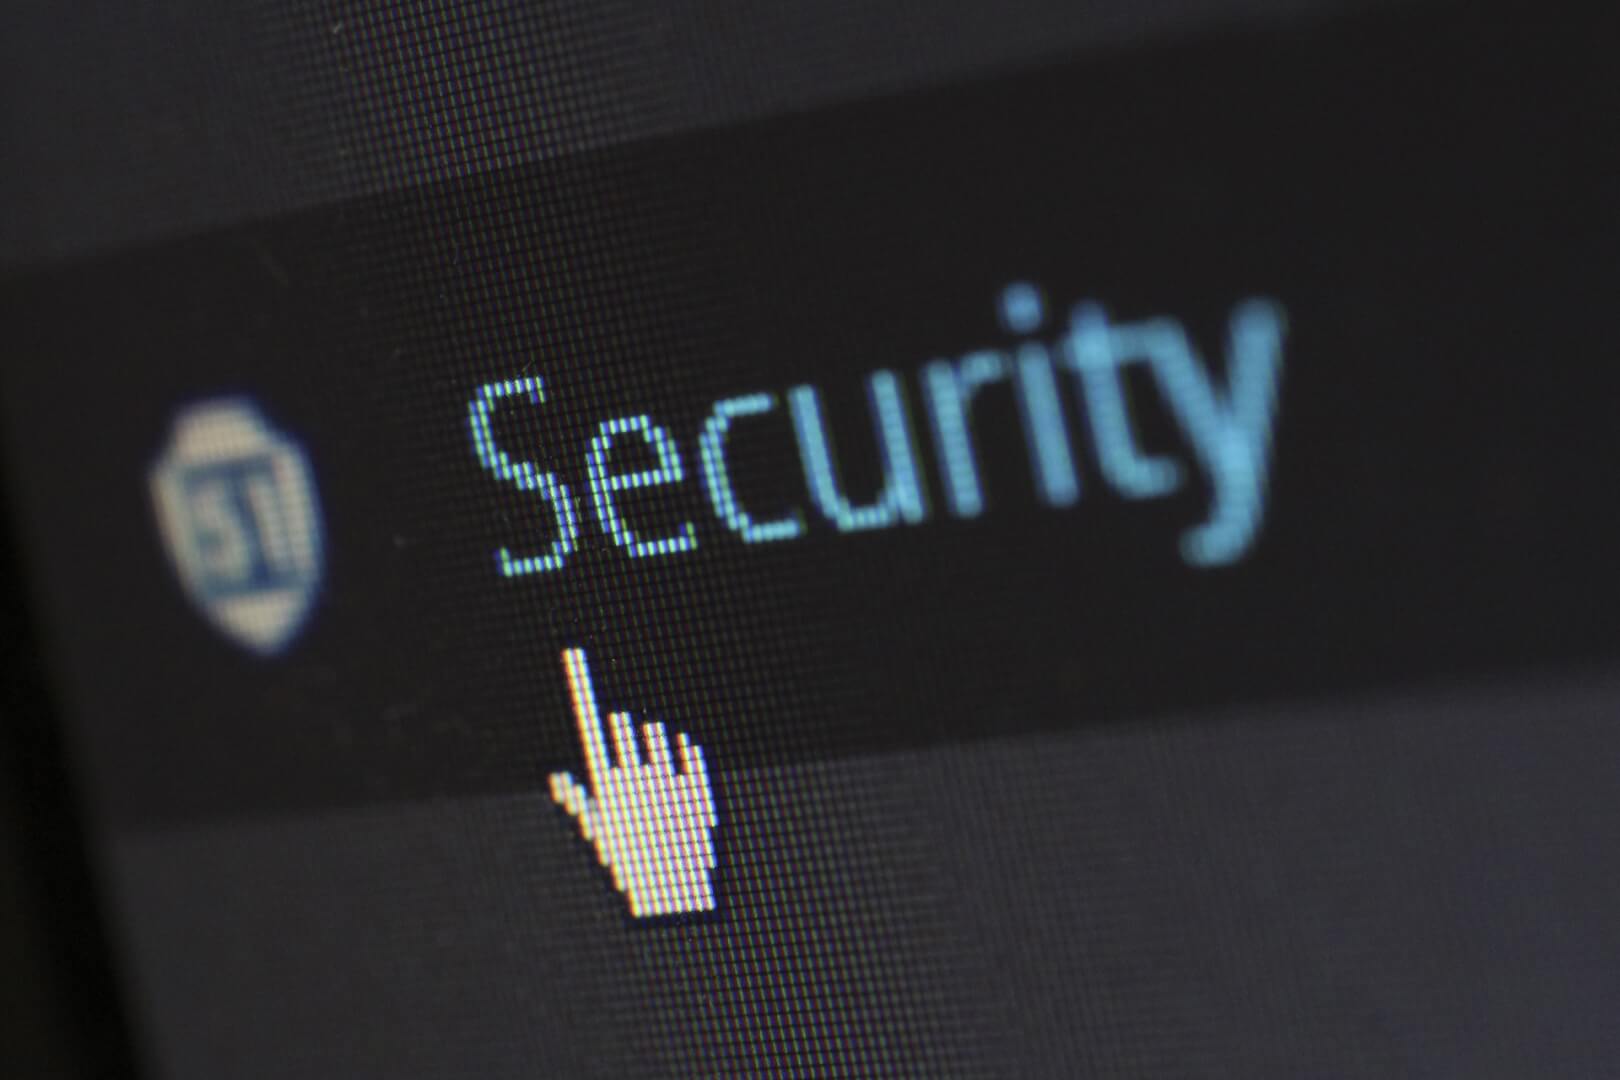 picture of a computer cursor hovering over a button entitled "Security"